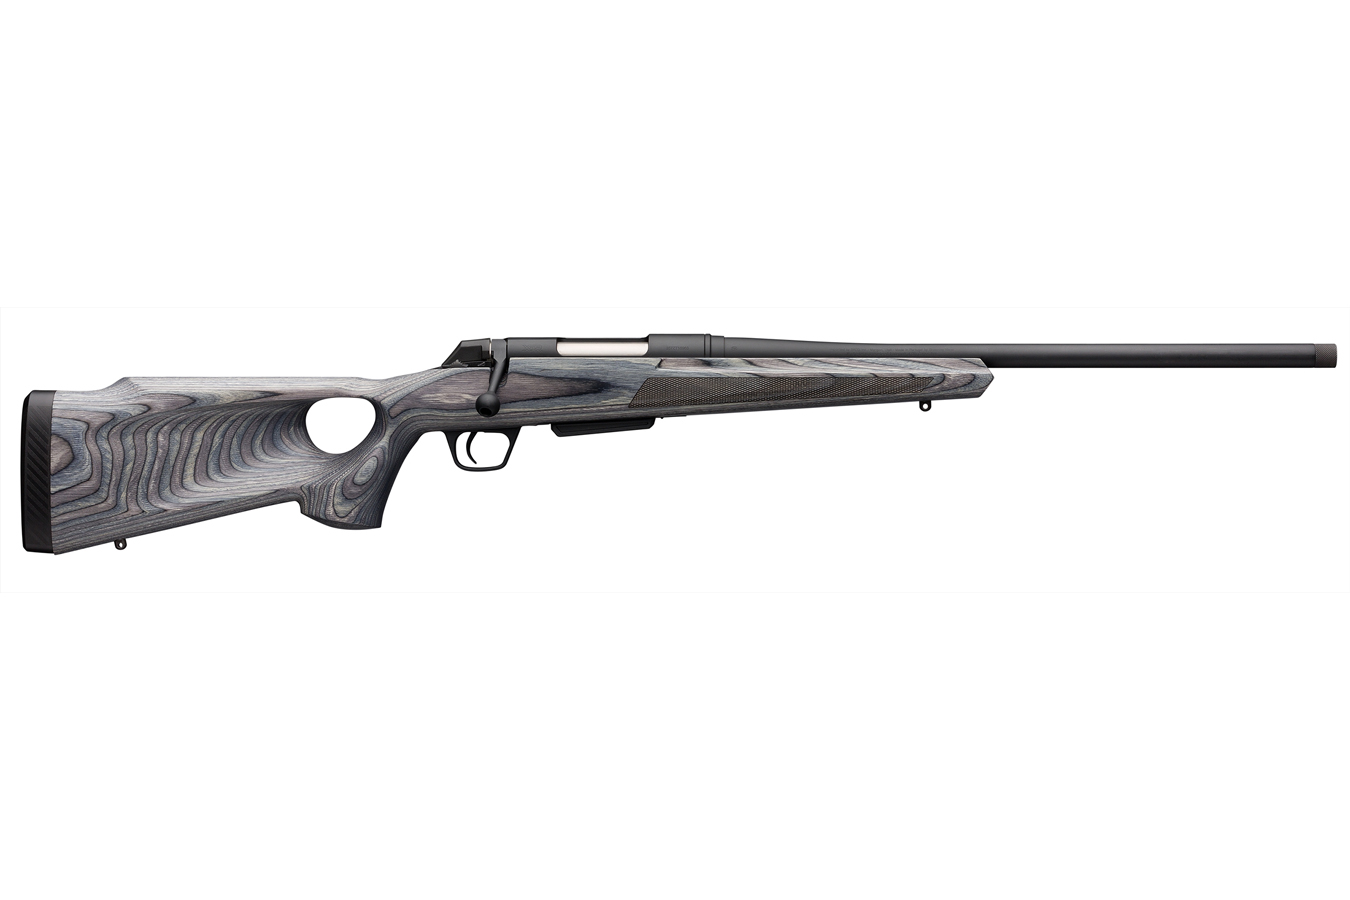 No. 17 Best Selling: WINCHESTER FIREARMS XPR VARMINT SR 350 LEGEND BOLT-ACTION RIFLE WITH LAMINATE THUMBHOLE STOCK